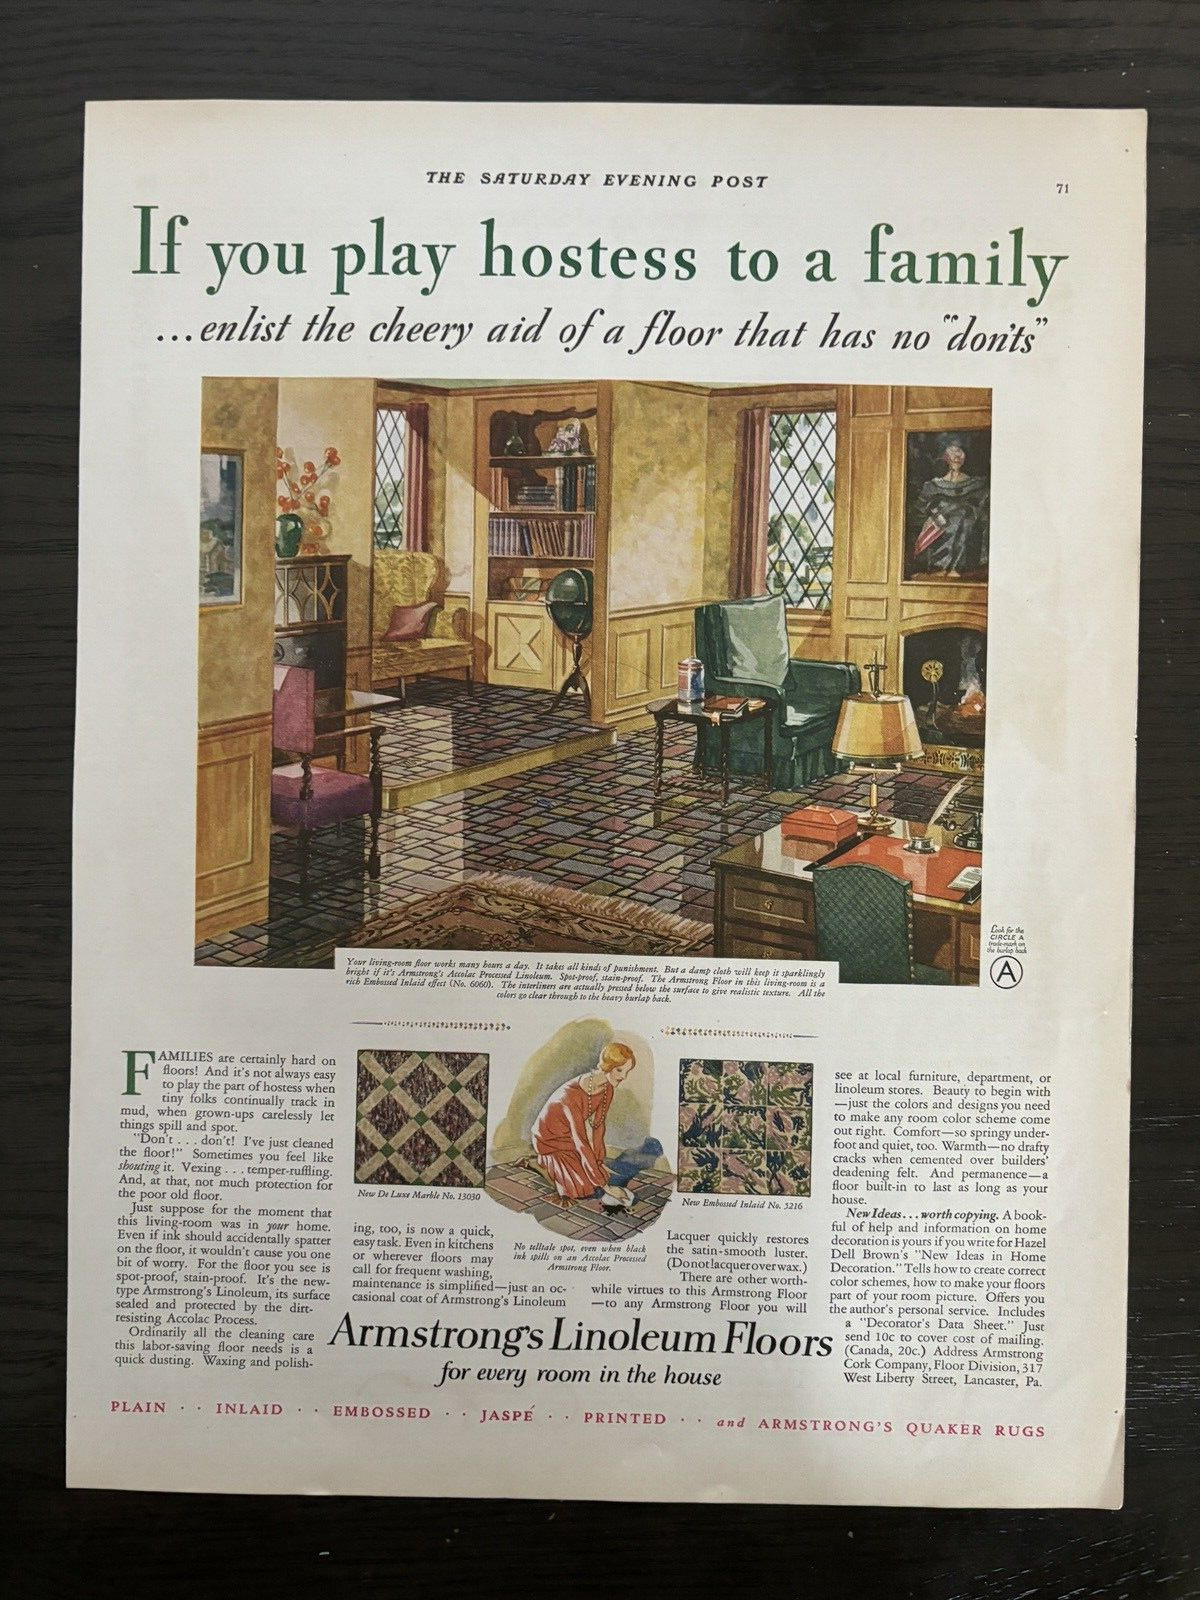 ARMSTRONG LINOLEUM FLOORS FOR EVERY ROOM IN THE HOUSE ART DECO VTG PRINT AD 1929